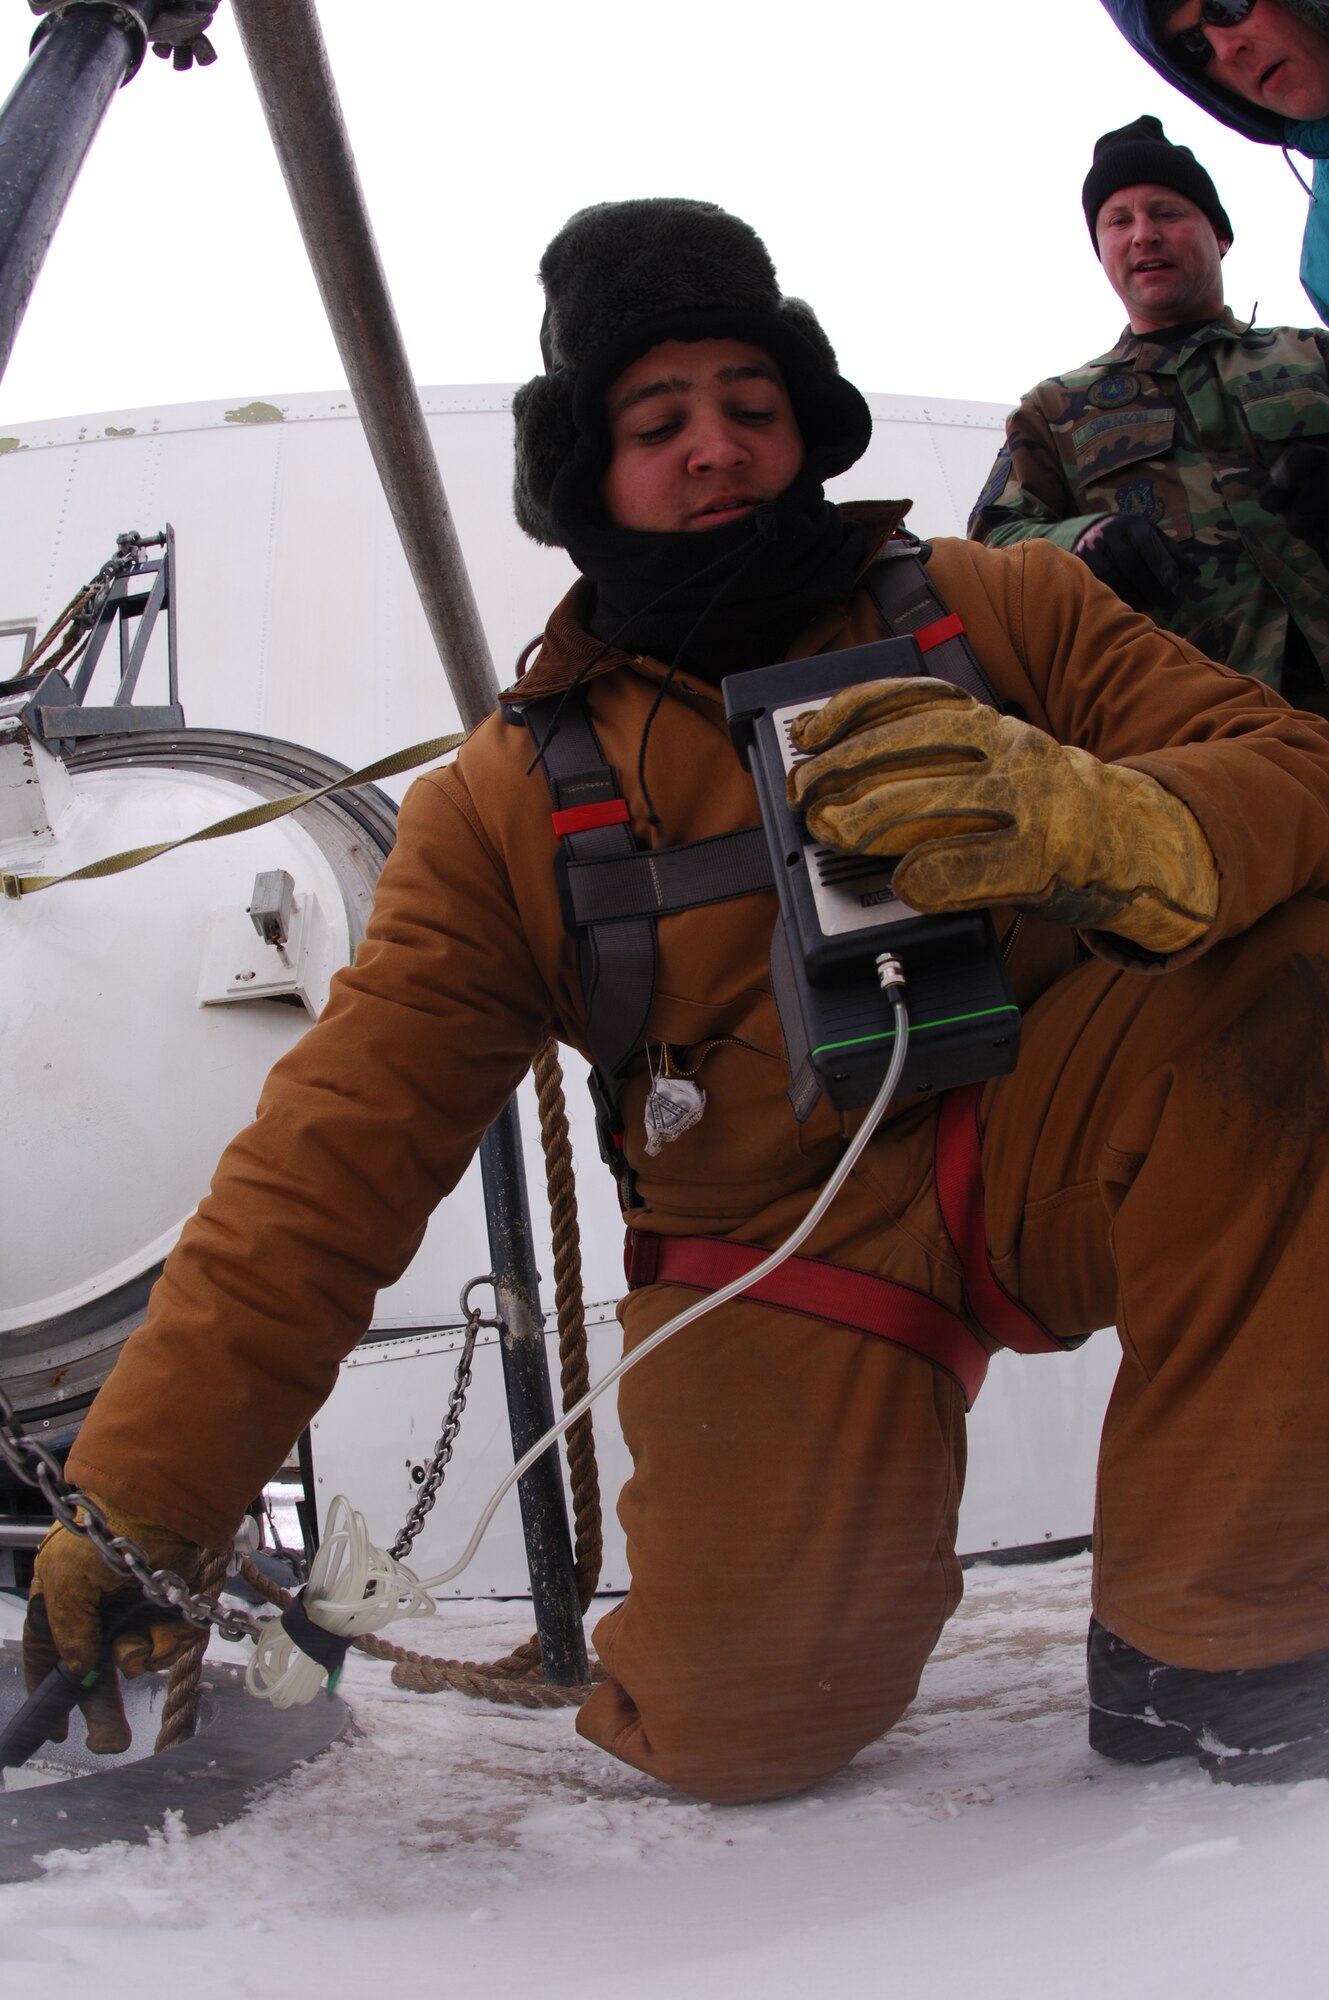 MINOT AIR FORCE BASE, N.D. -- Senior Airman Edwin Acosta Jr., 91st Missile Maintenance Squadron, checks the oxygen levels in the confined space before allowing entry after the simulated electronic missile launch conducted at Mike 11 Nov. 1. (U.S. Air Force photo by Staff Sgt. Joe Laws)